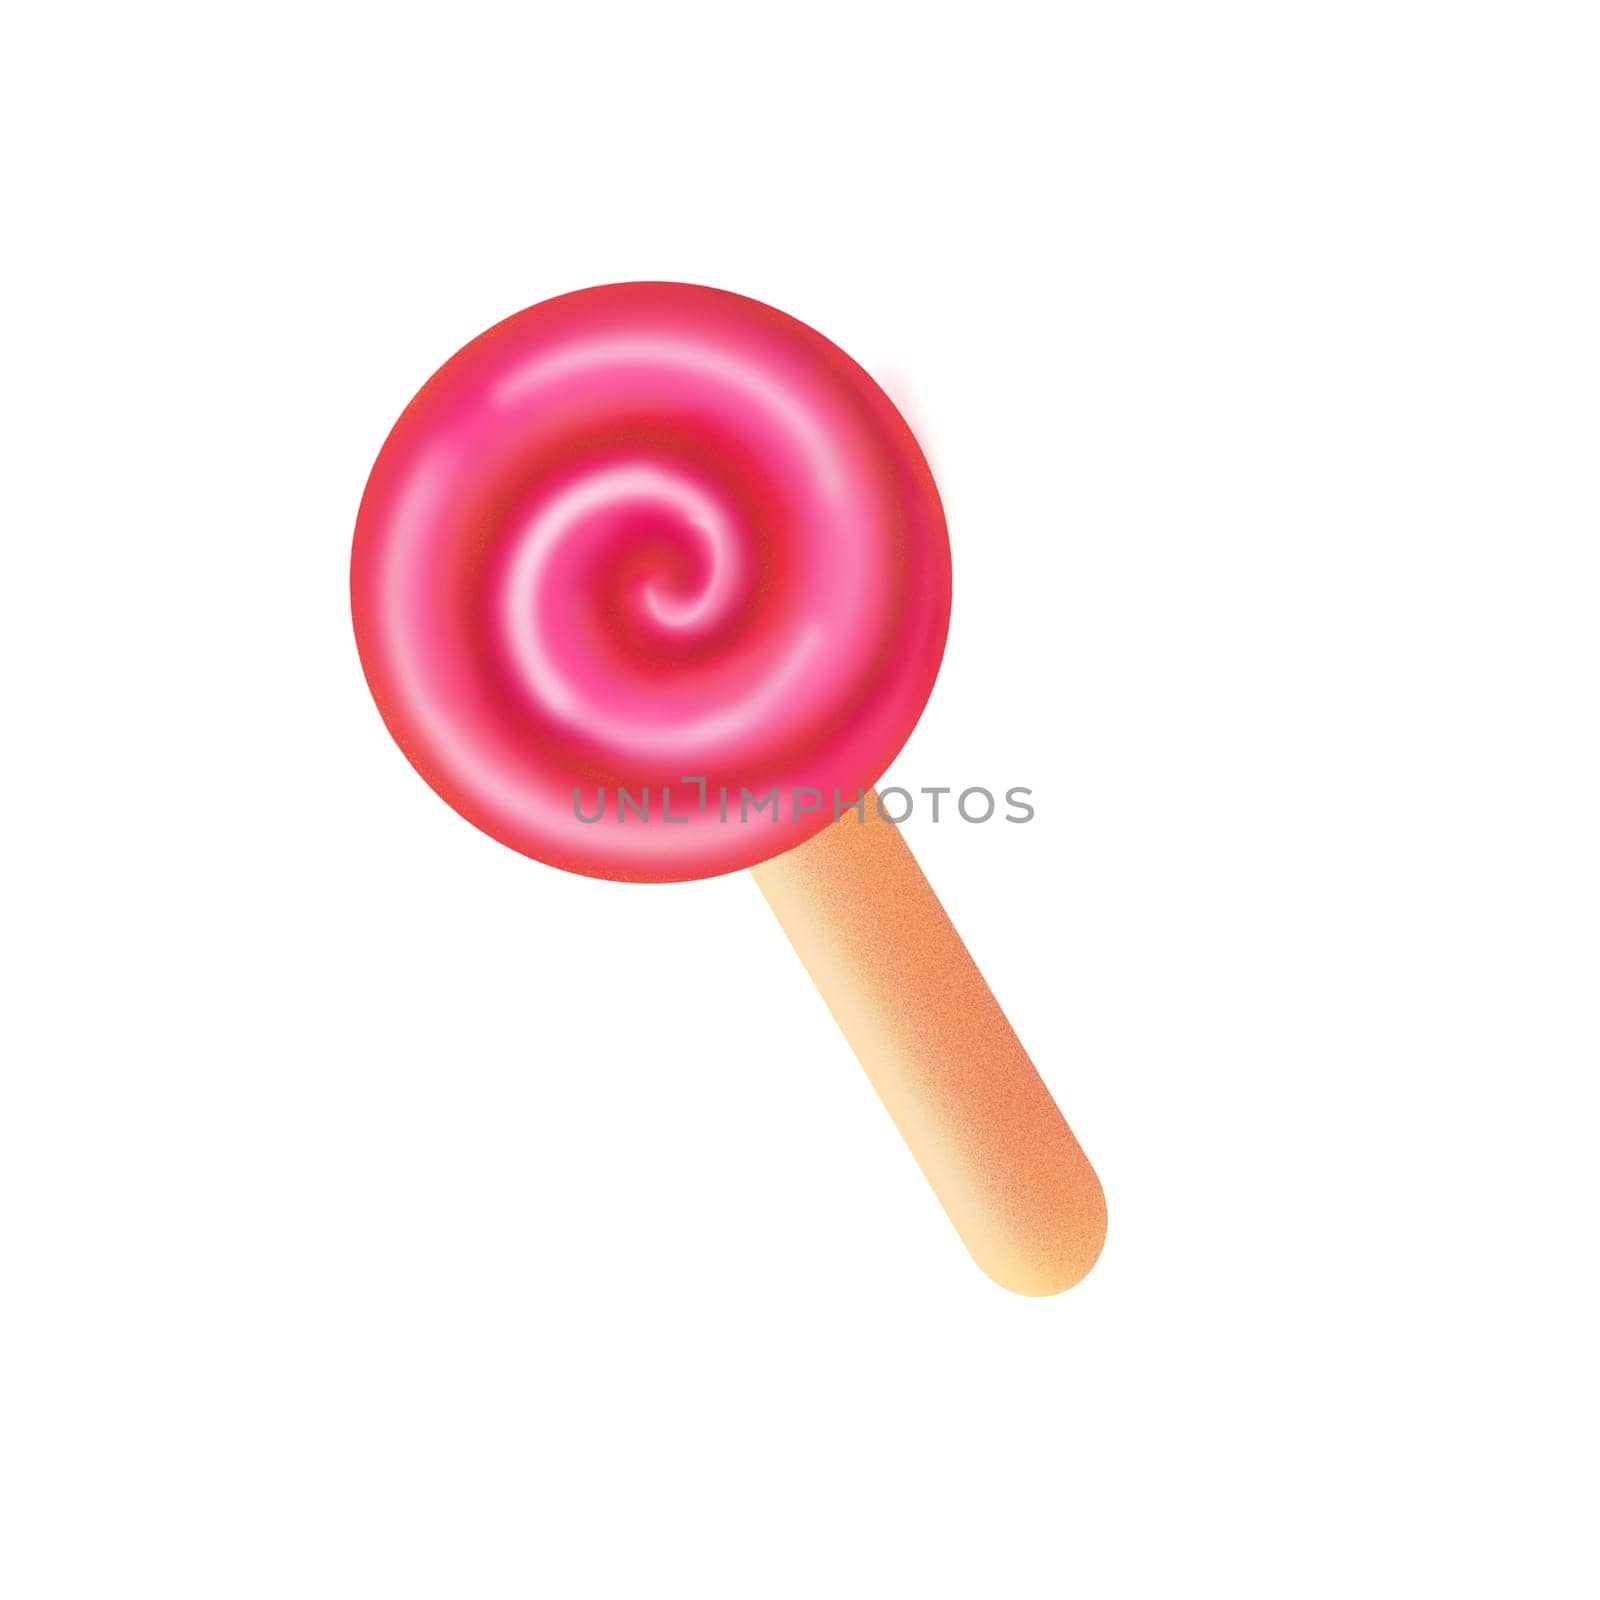 illustration of minimalist style round red candy on stick isolated on white background